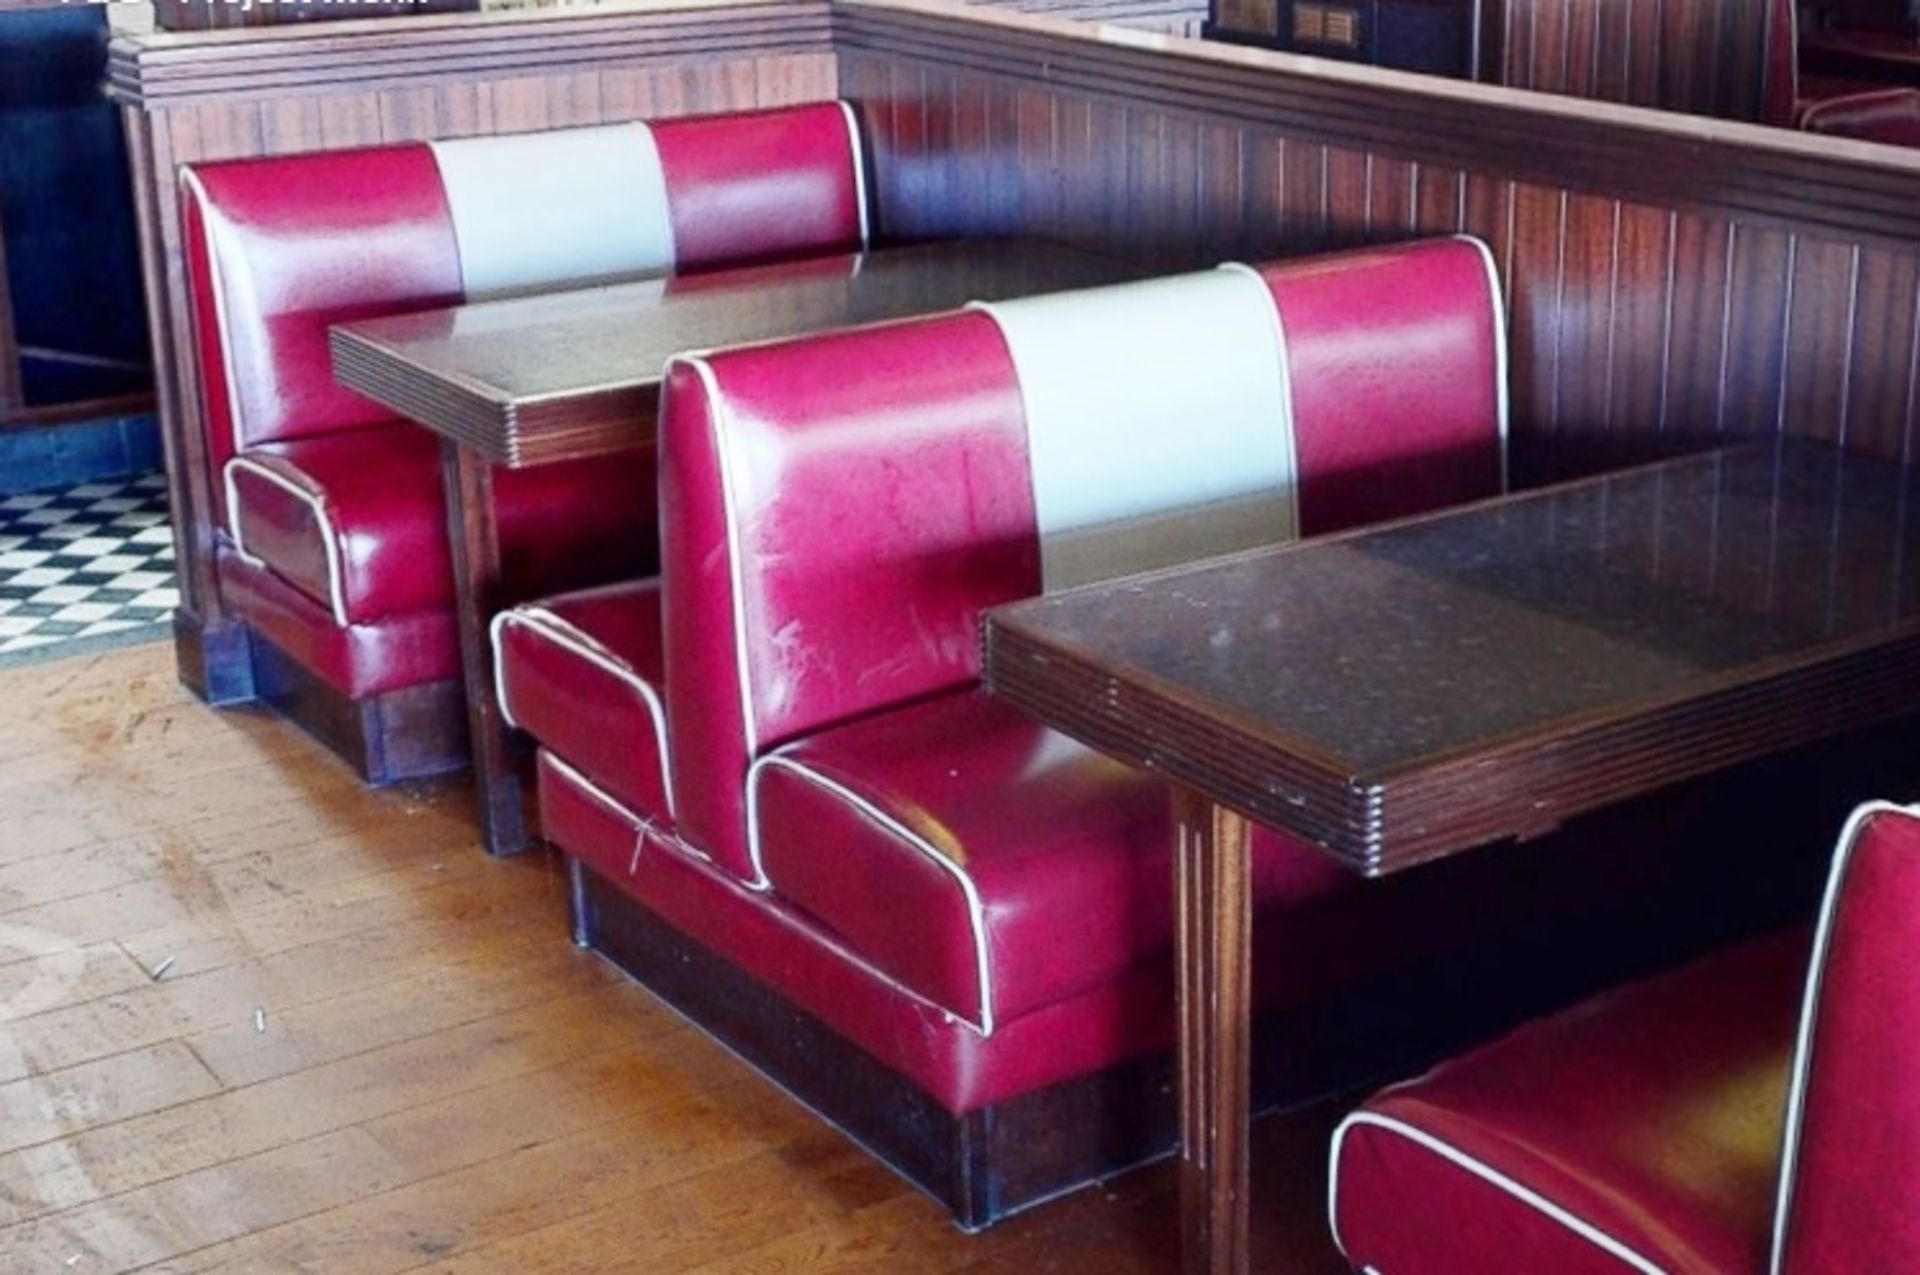 1 x Assorted Lot of Restaurant Seating Benches - Seats 18 Persons - American Diner Style in Red - Image 2 of 11